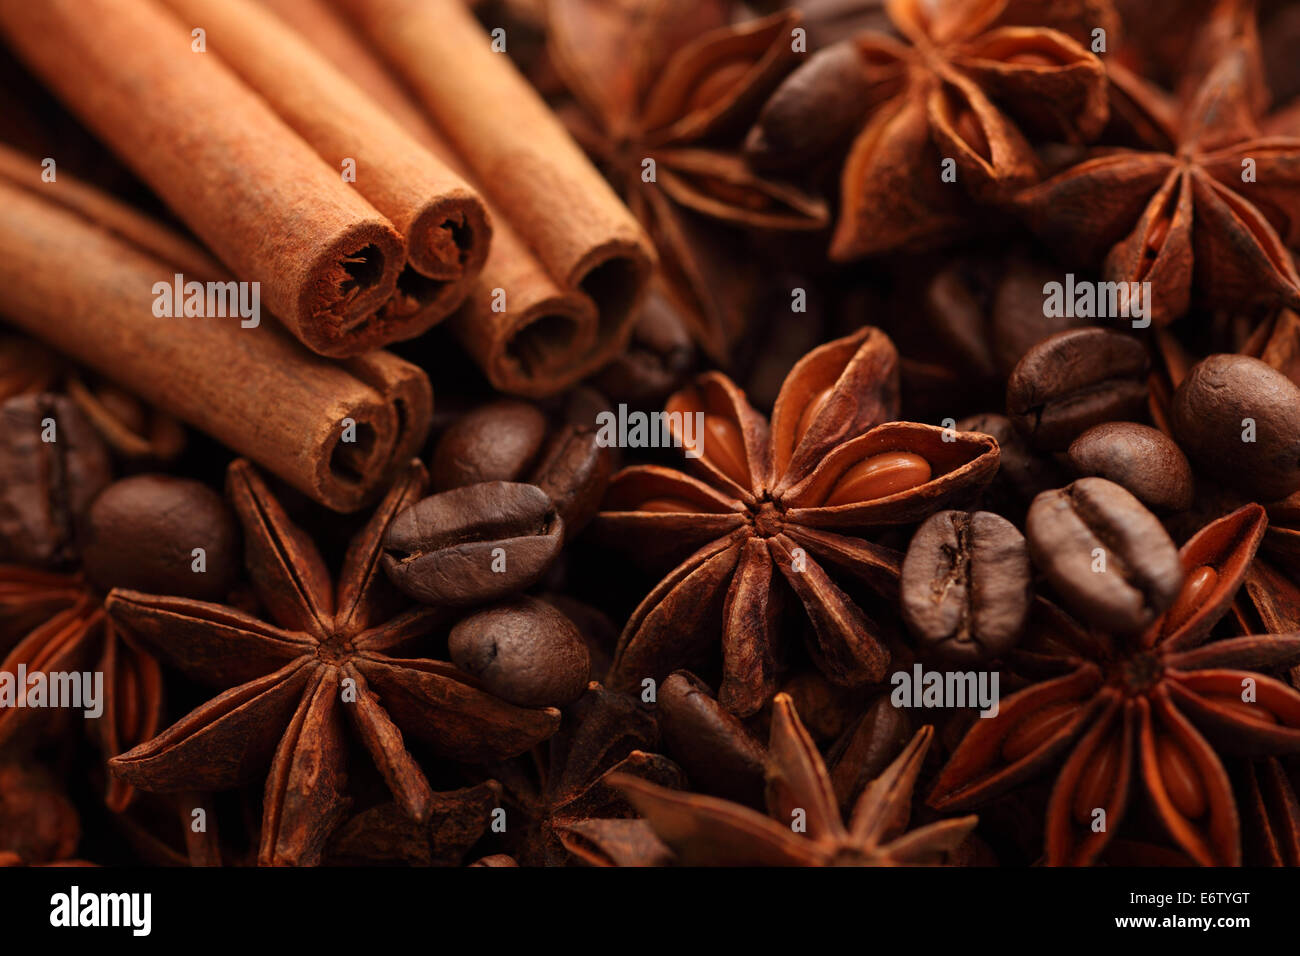 Cinnamon sticks, star anise and coffee beans. Close-up. Stock Photo